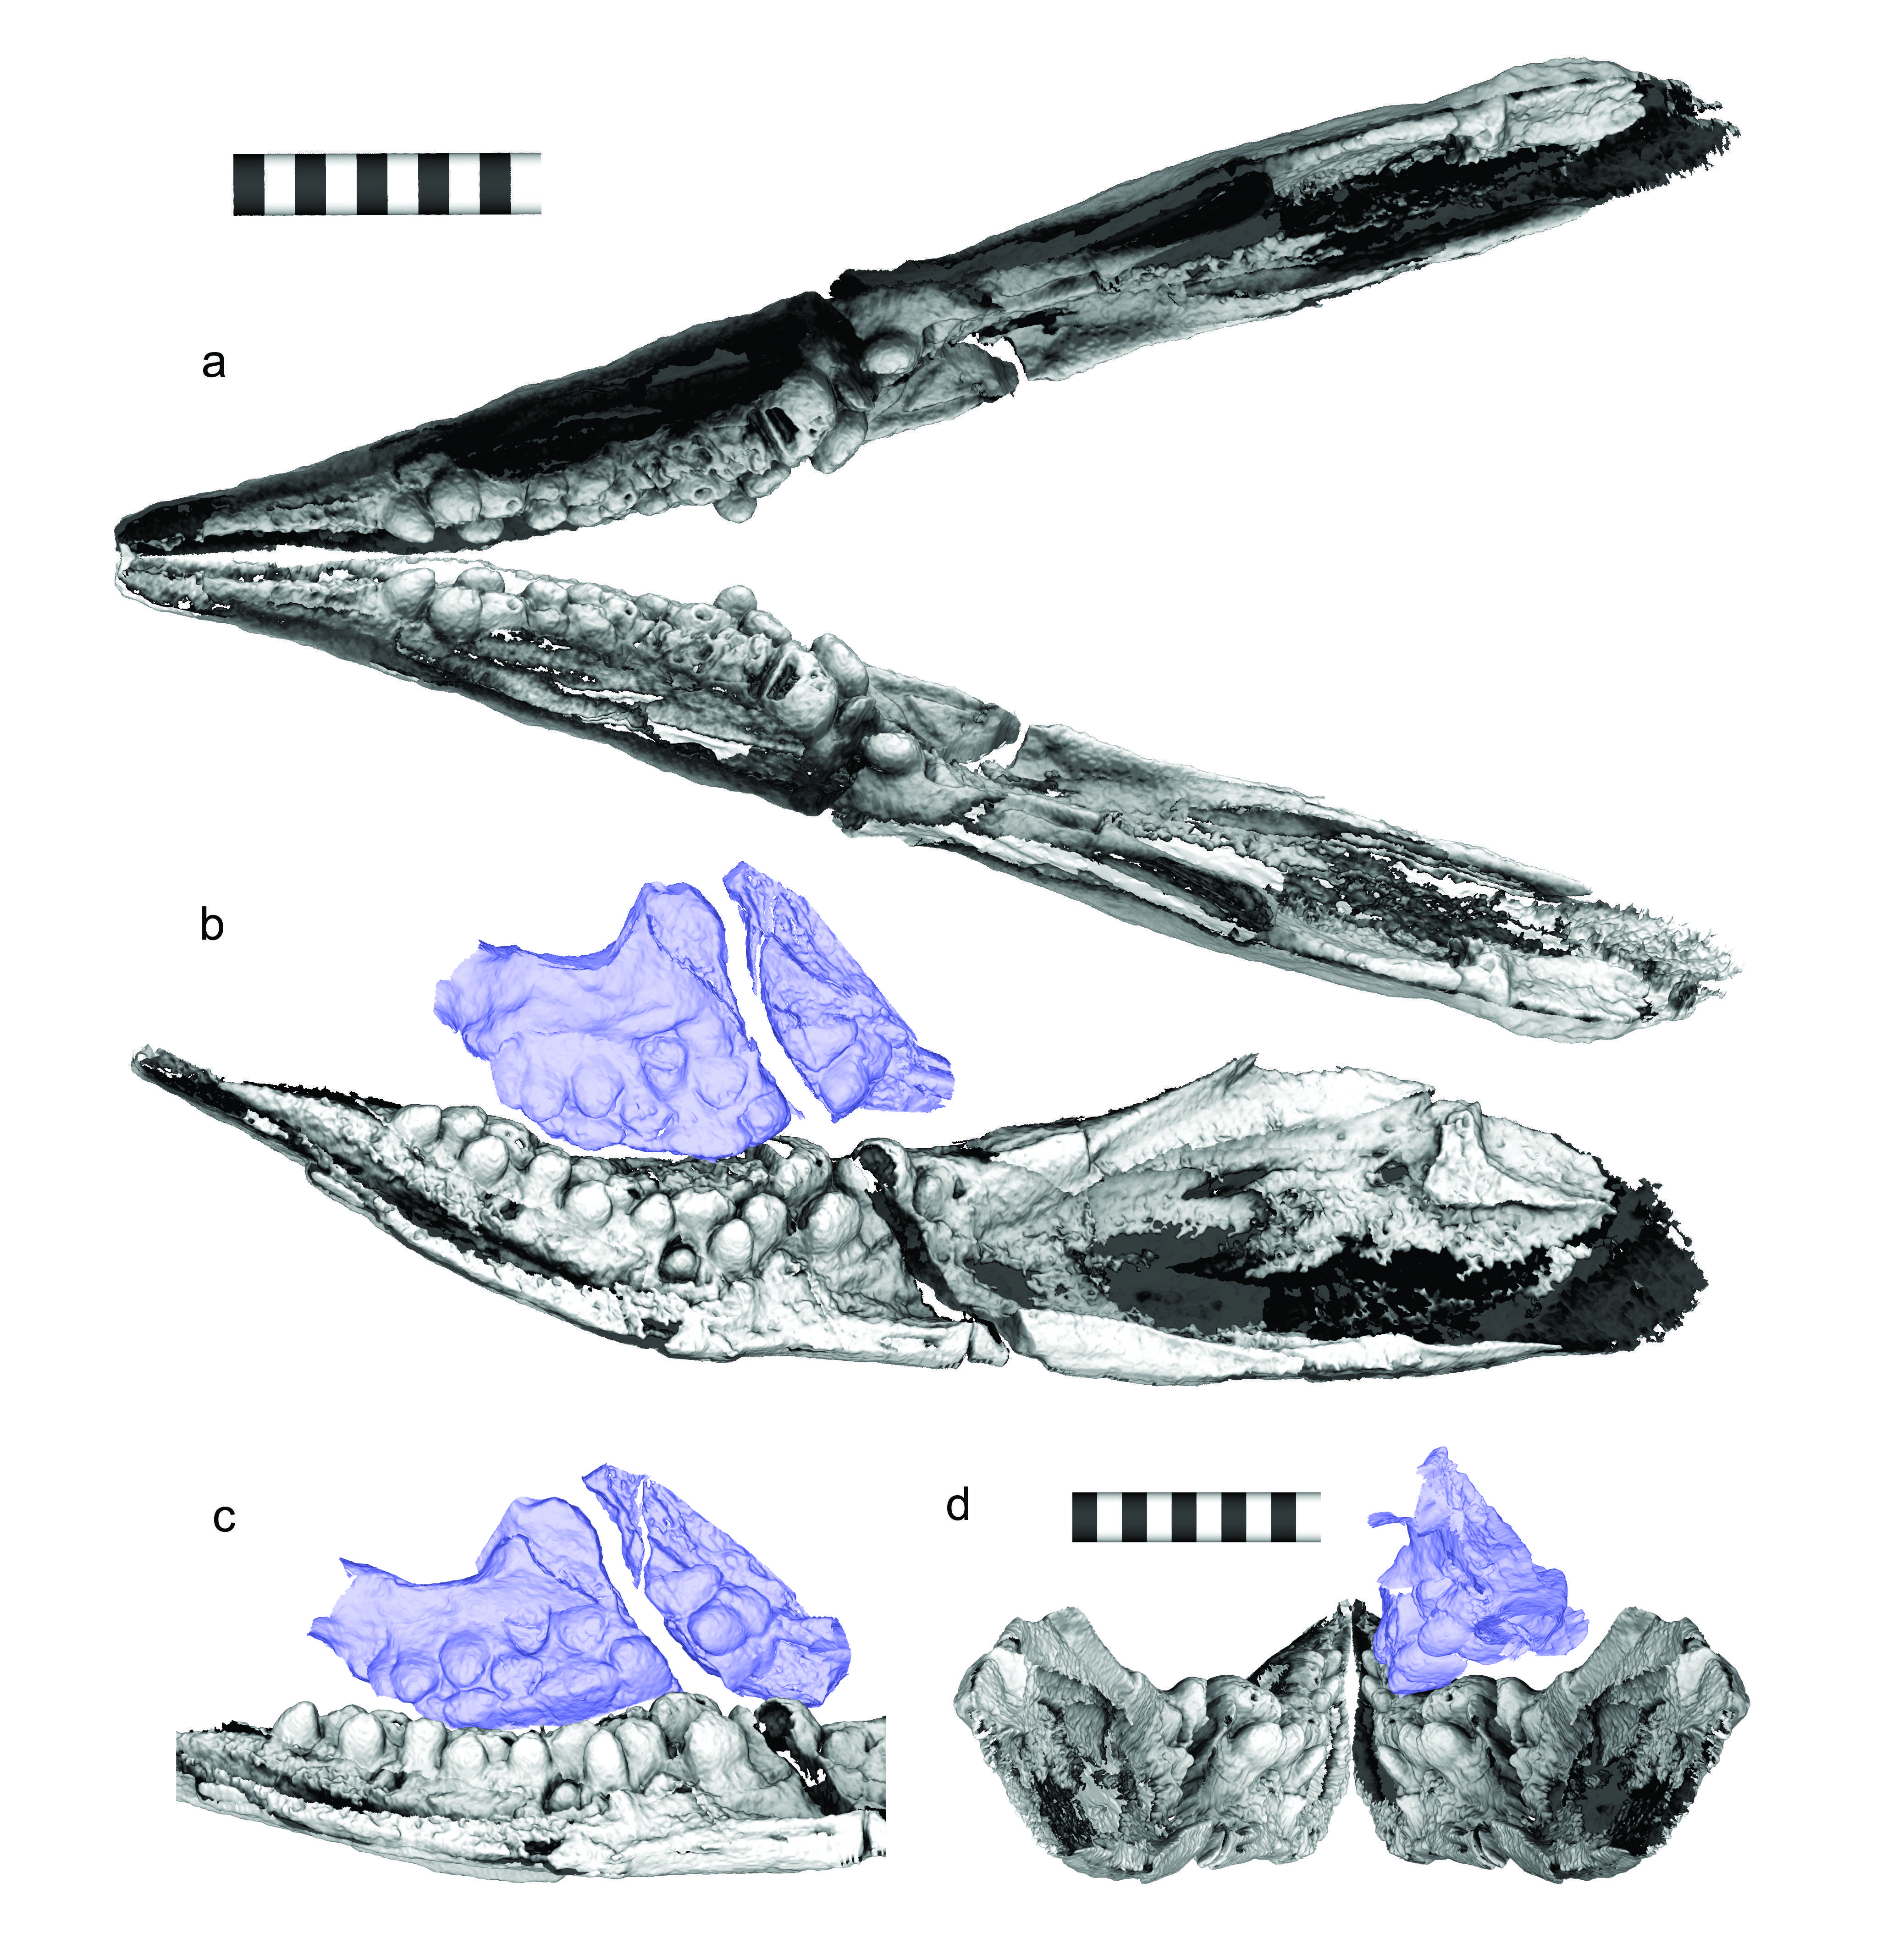 Scans of the Cartorhynchus fossil showed pebble-shaped teeth